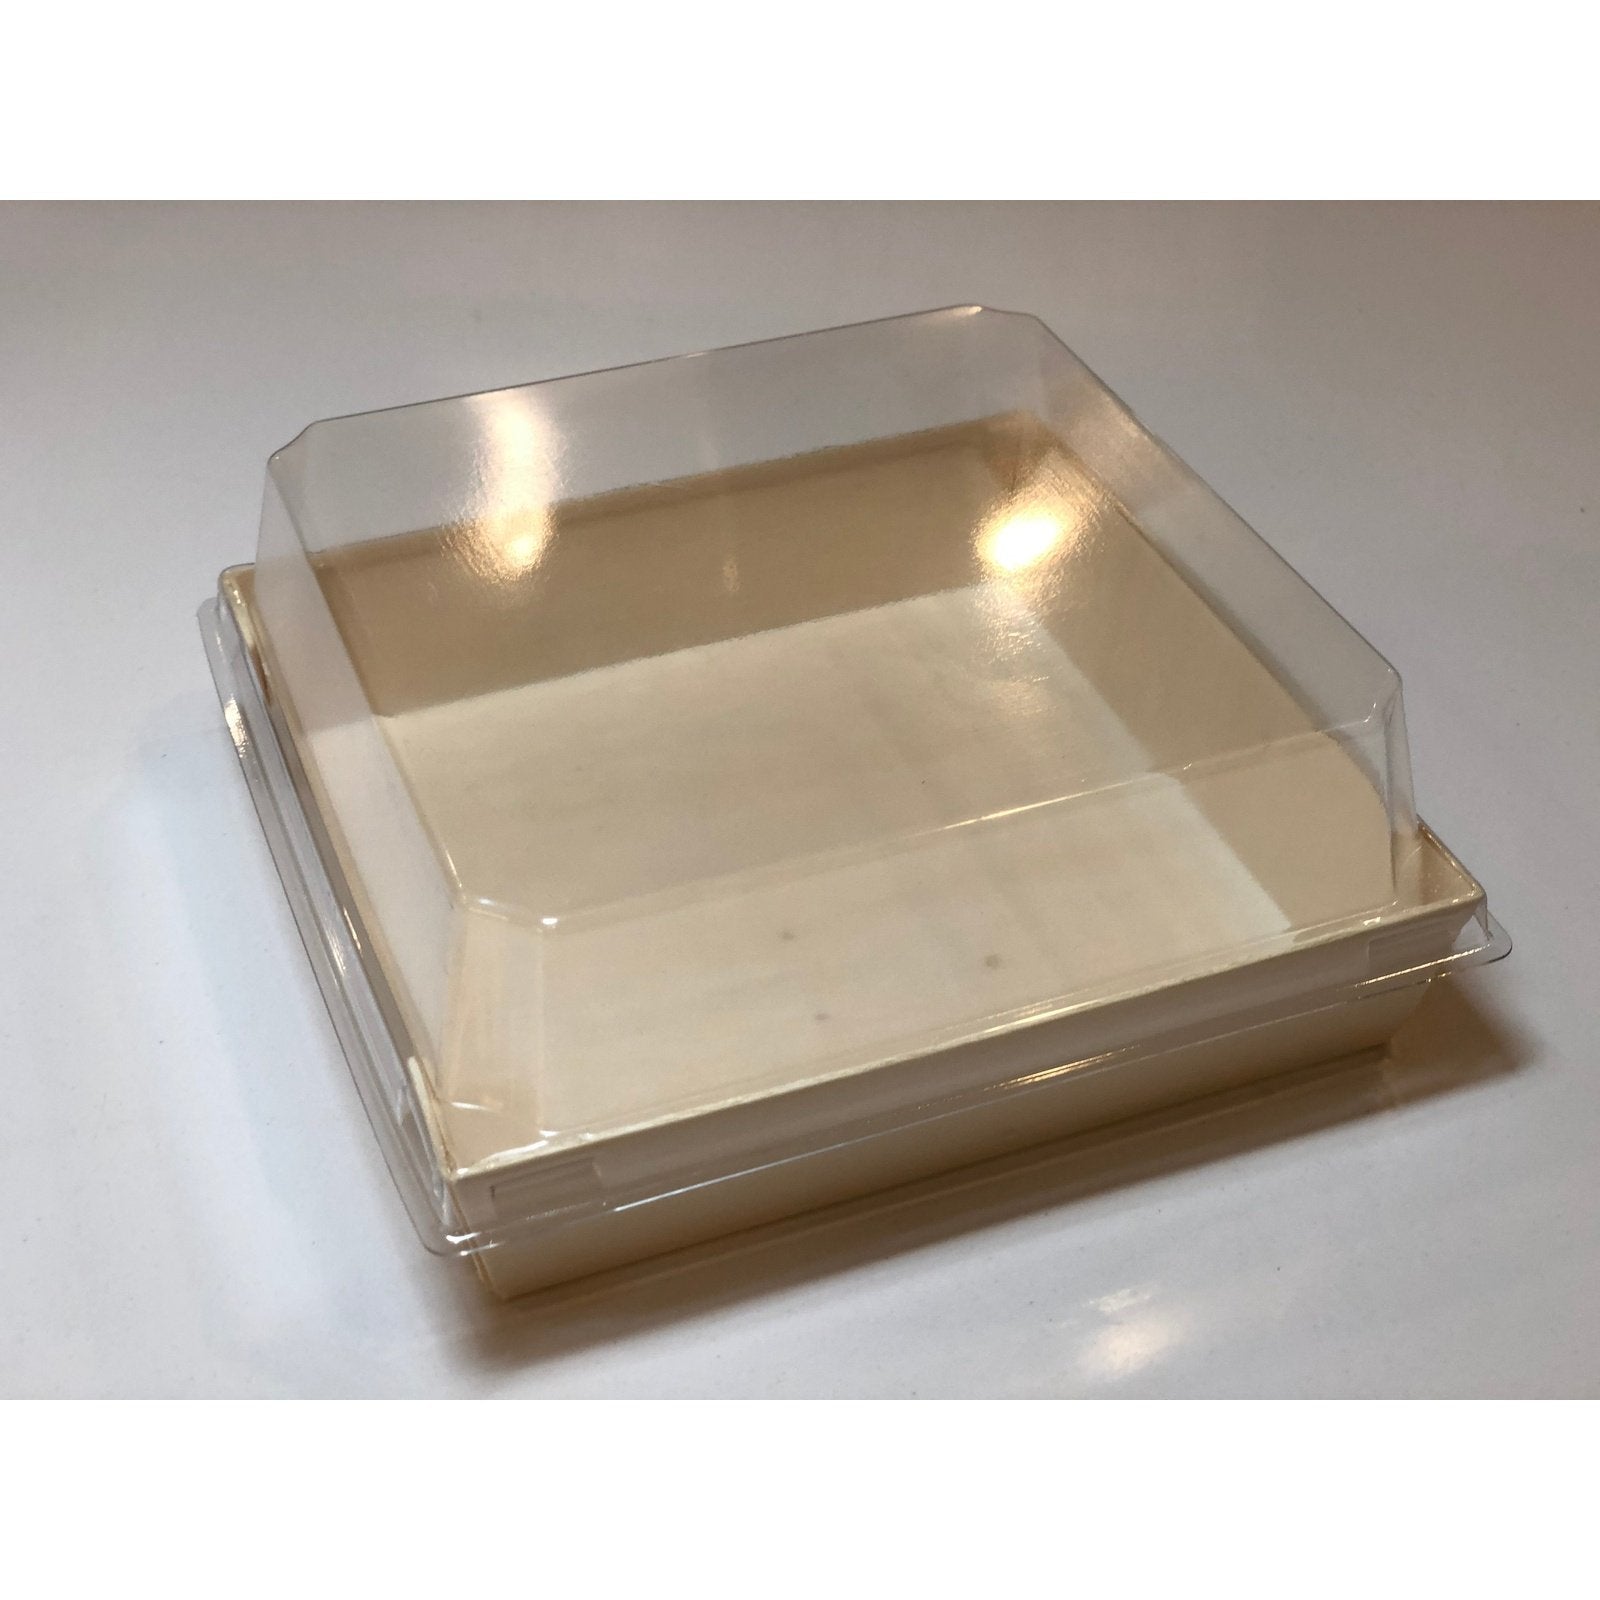 Plastic Plates - Clear Rectangle Cake Plates